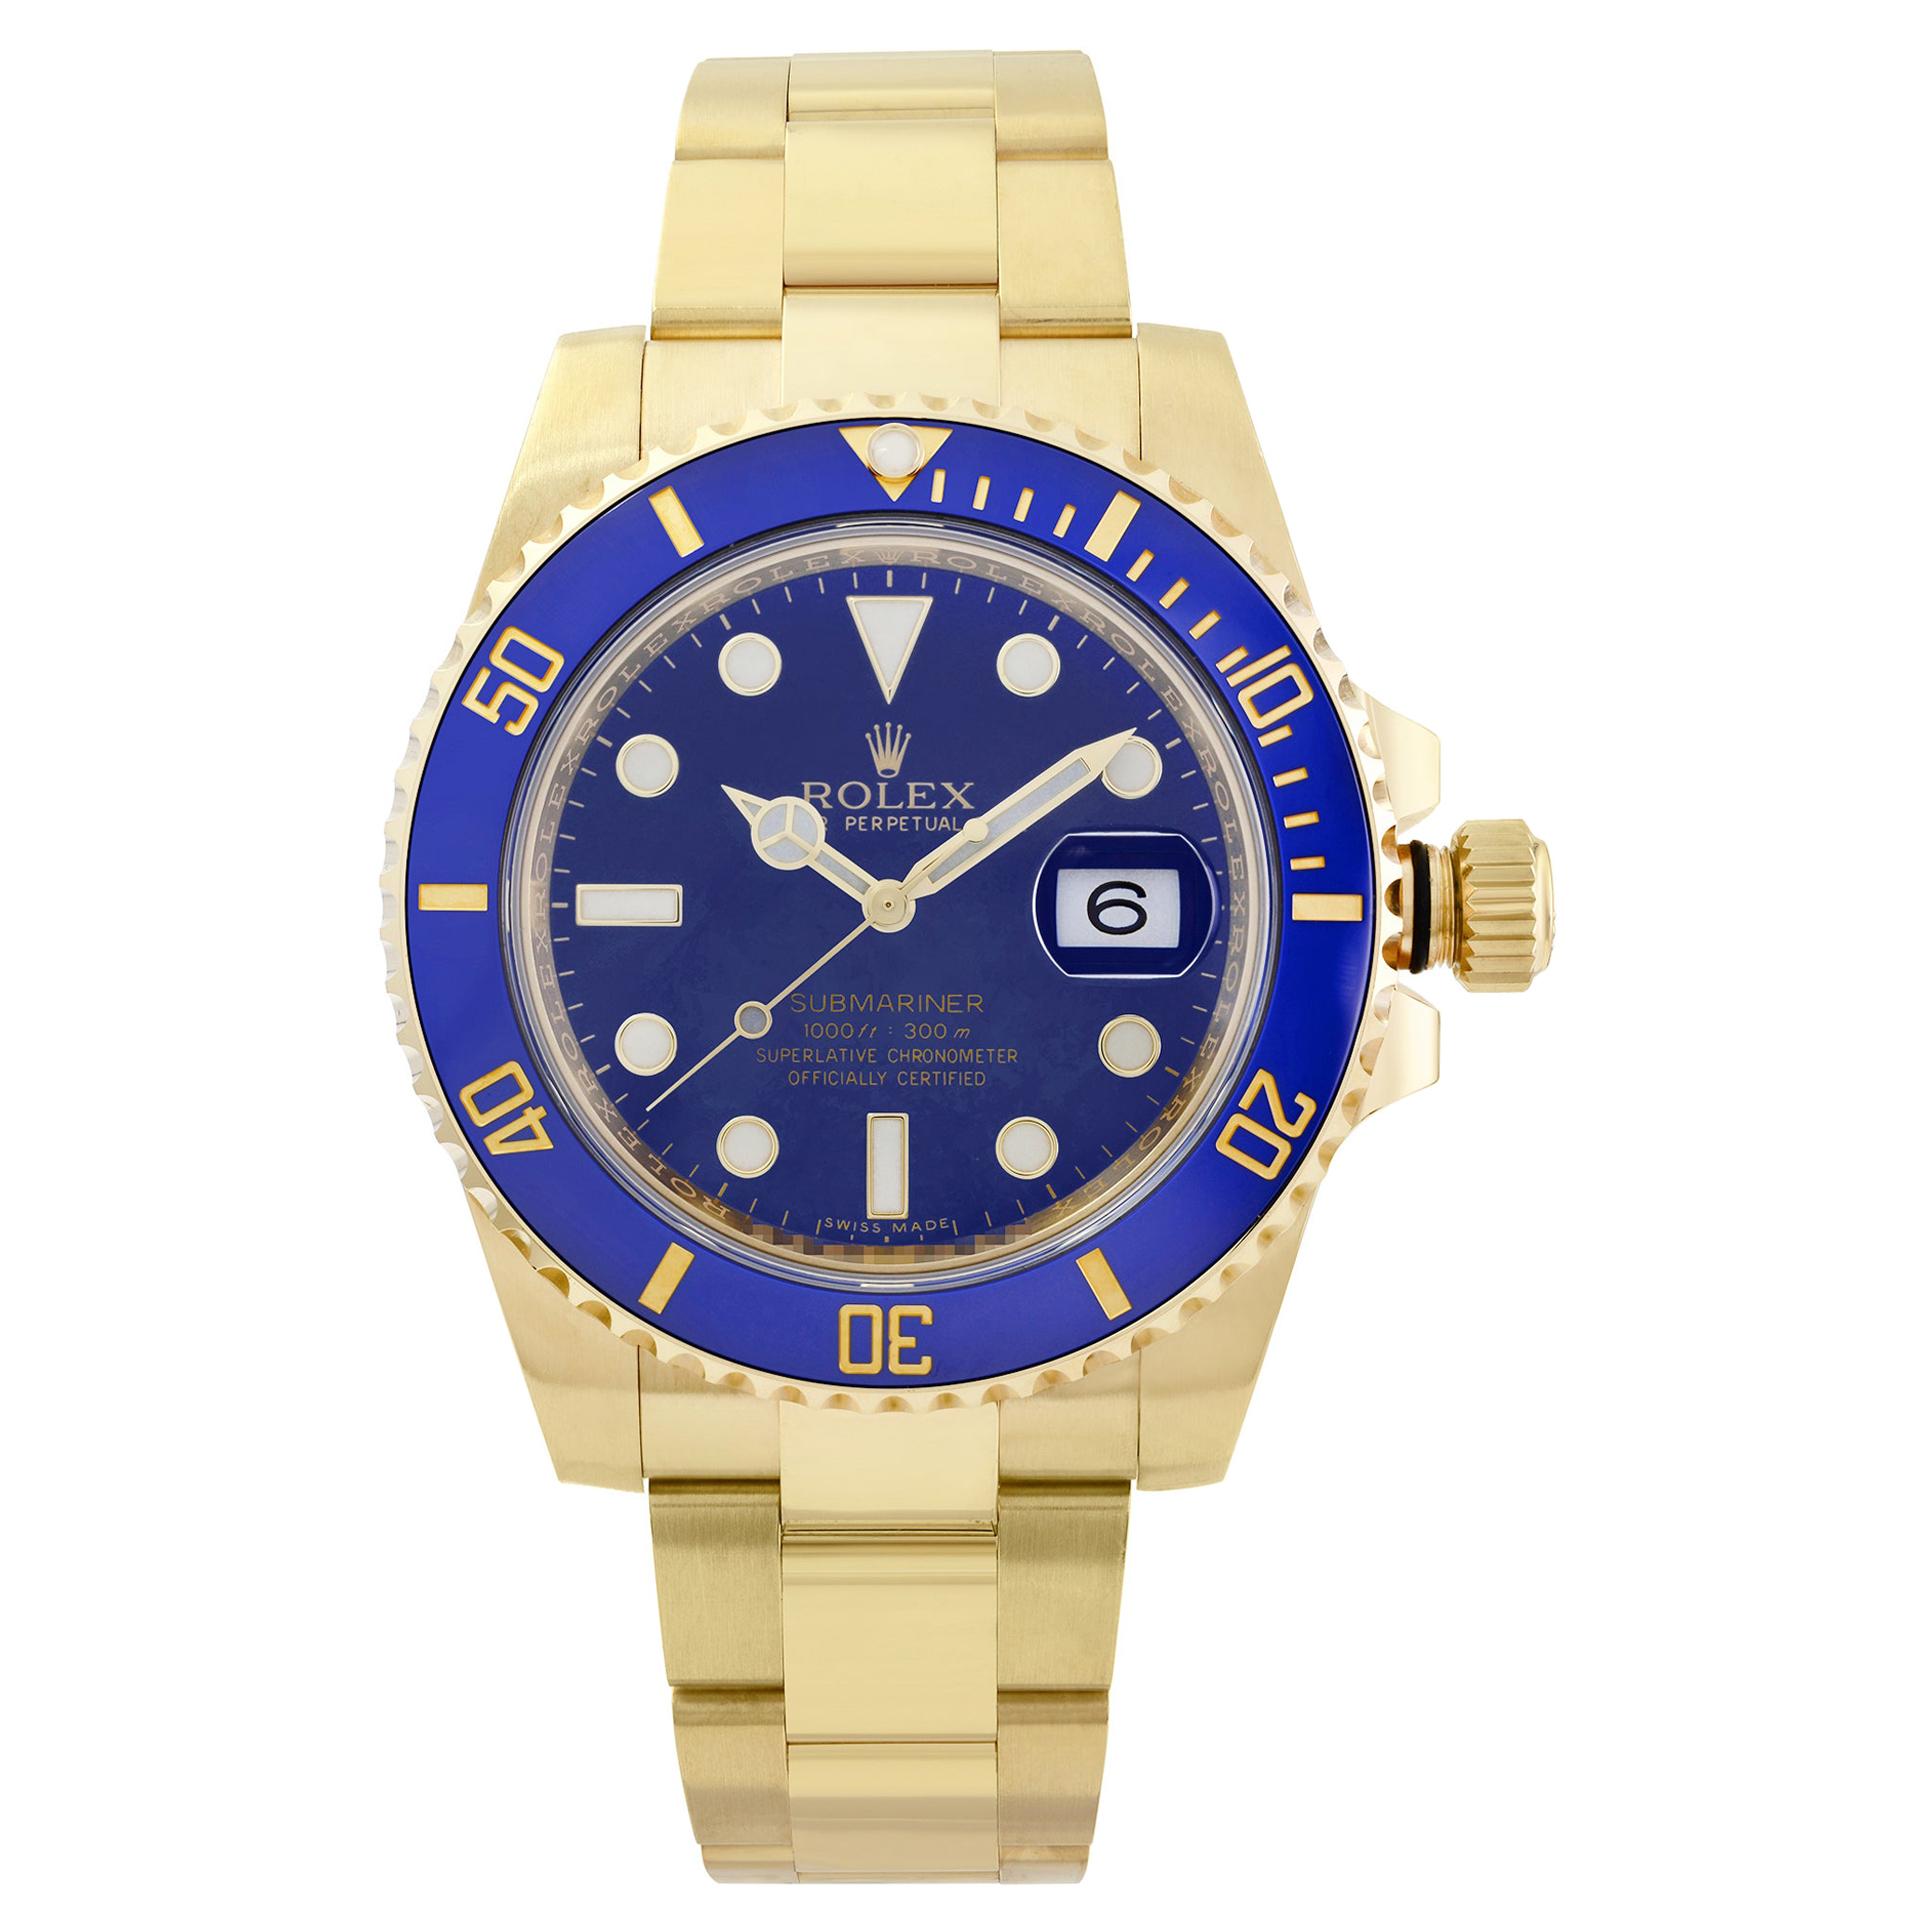 Rolex Submariner 18K Yellow Gold Ceramic Blue Dial Automatic Mens Watch 116618LB